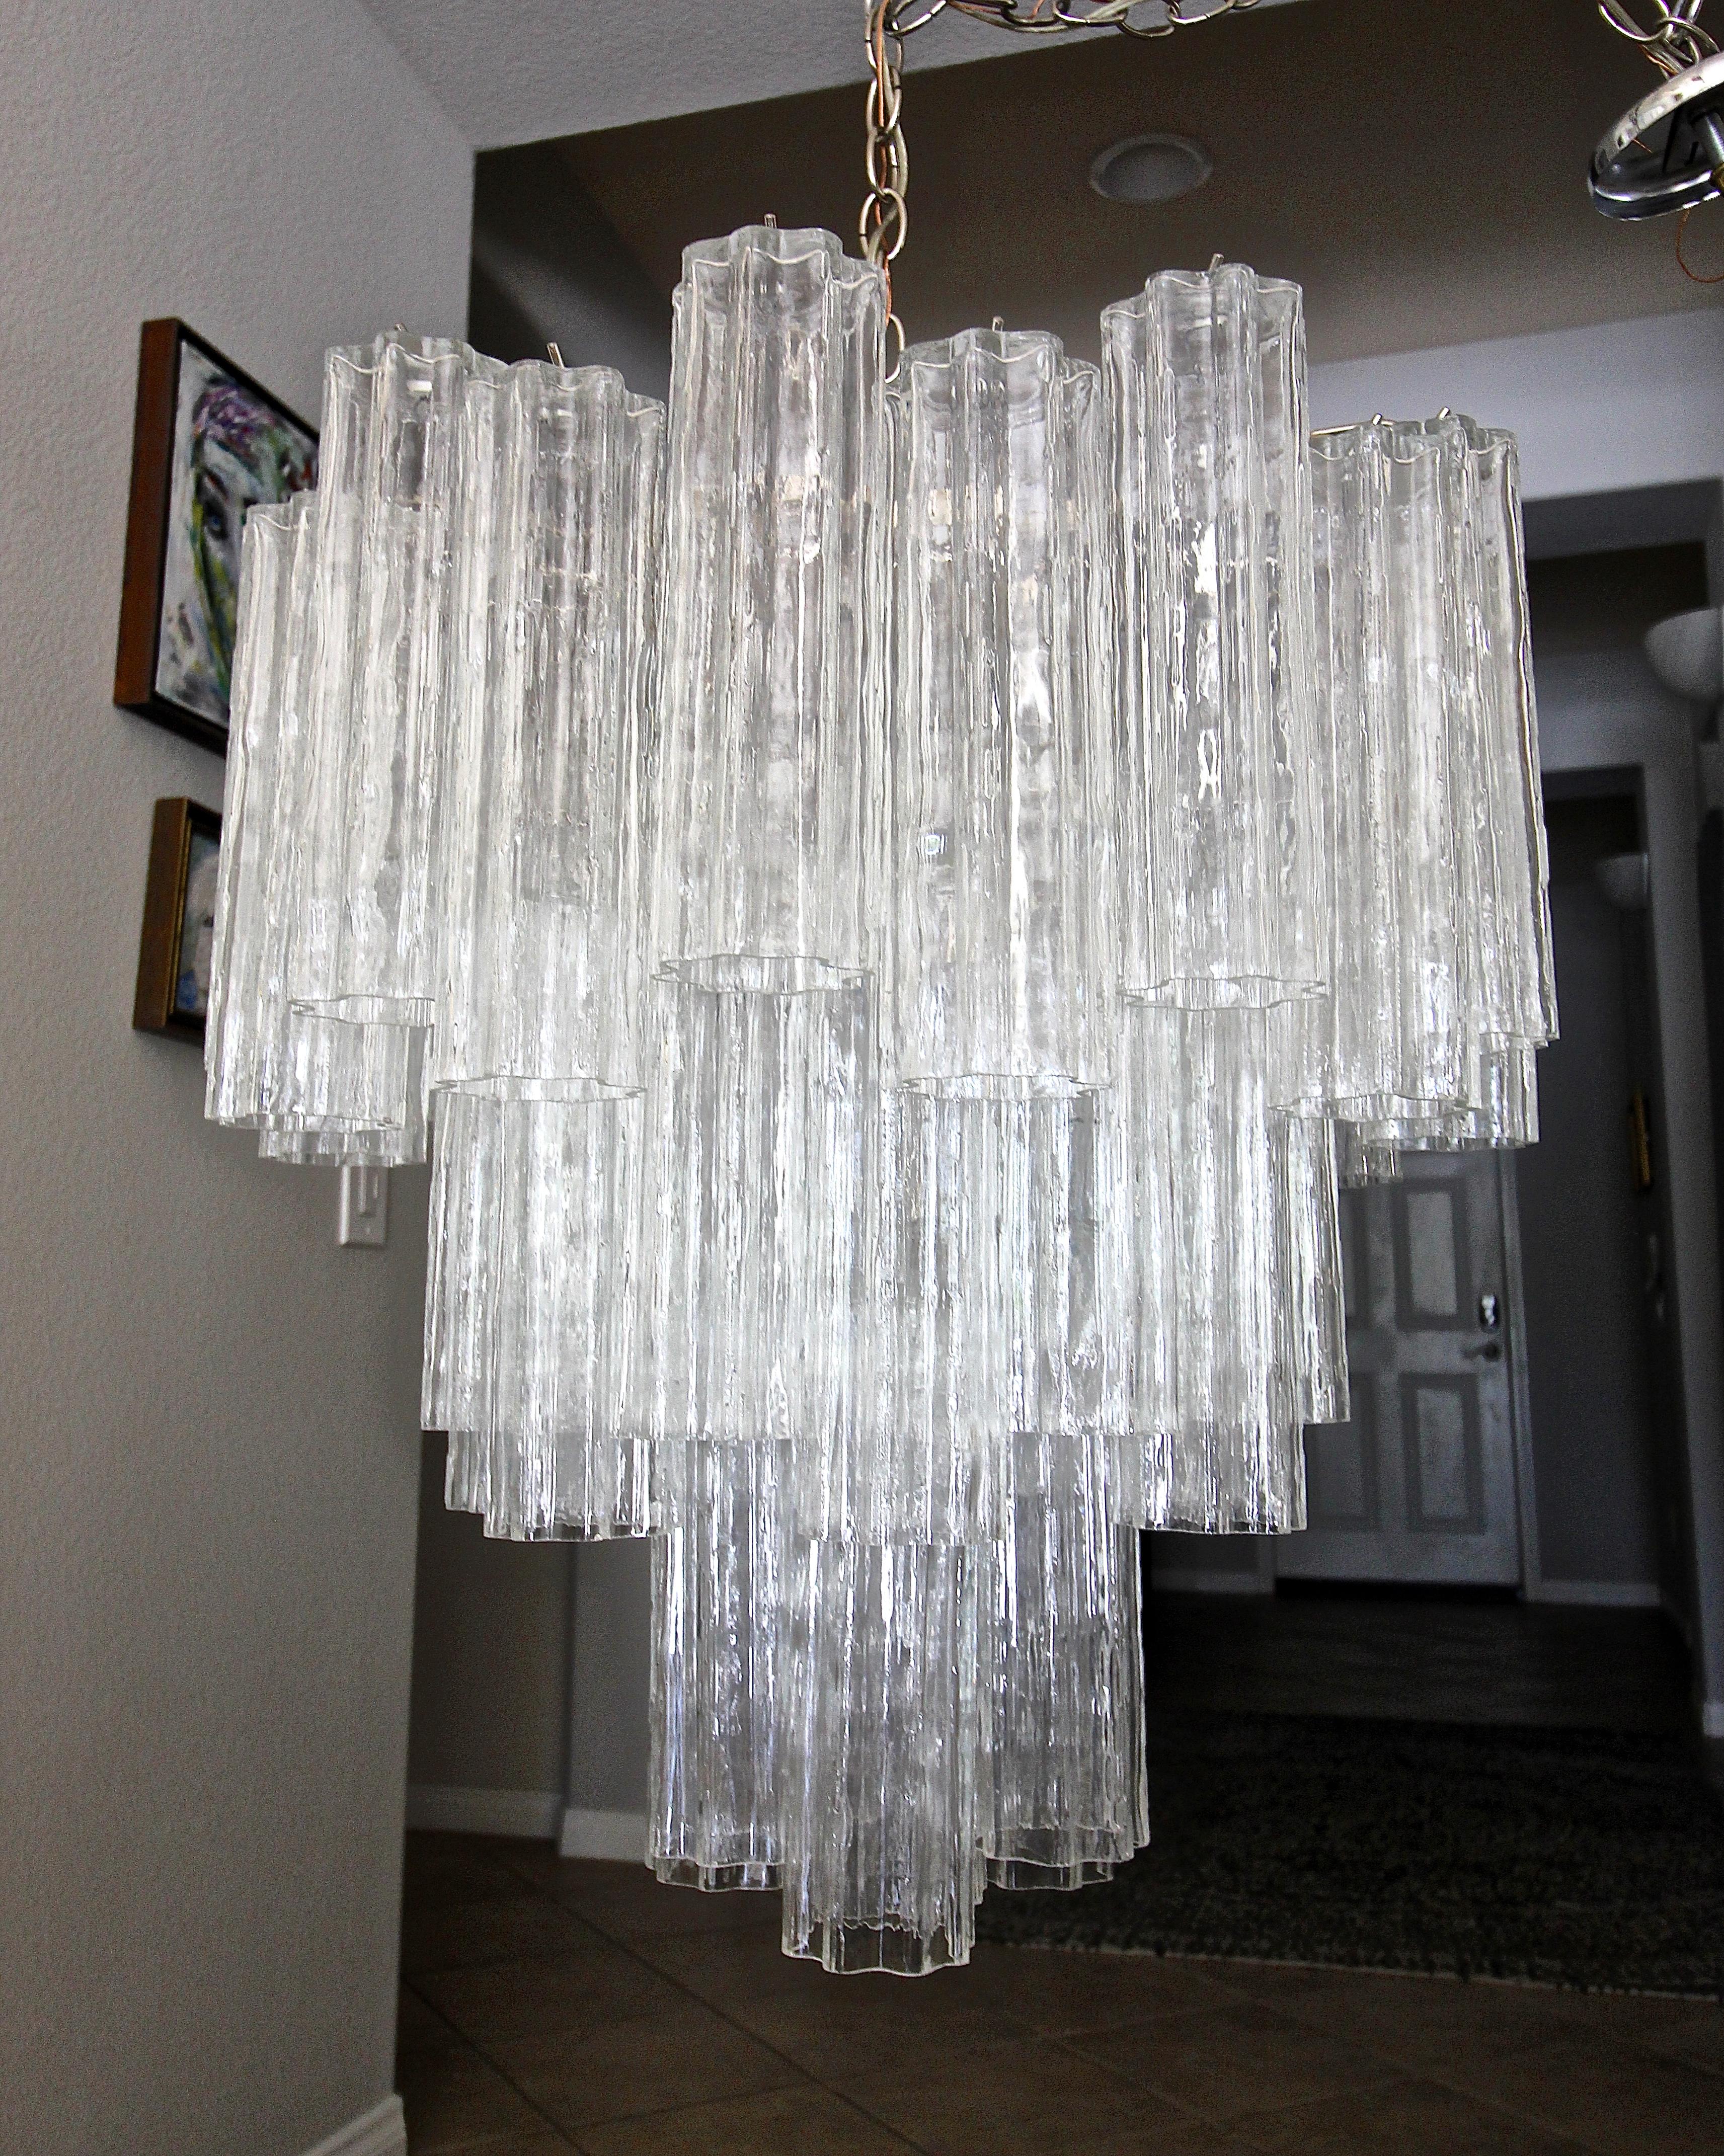 Murano 10-light vintage chandelier composed of handcrafted textured heavy 8 point 